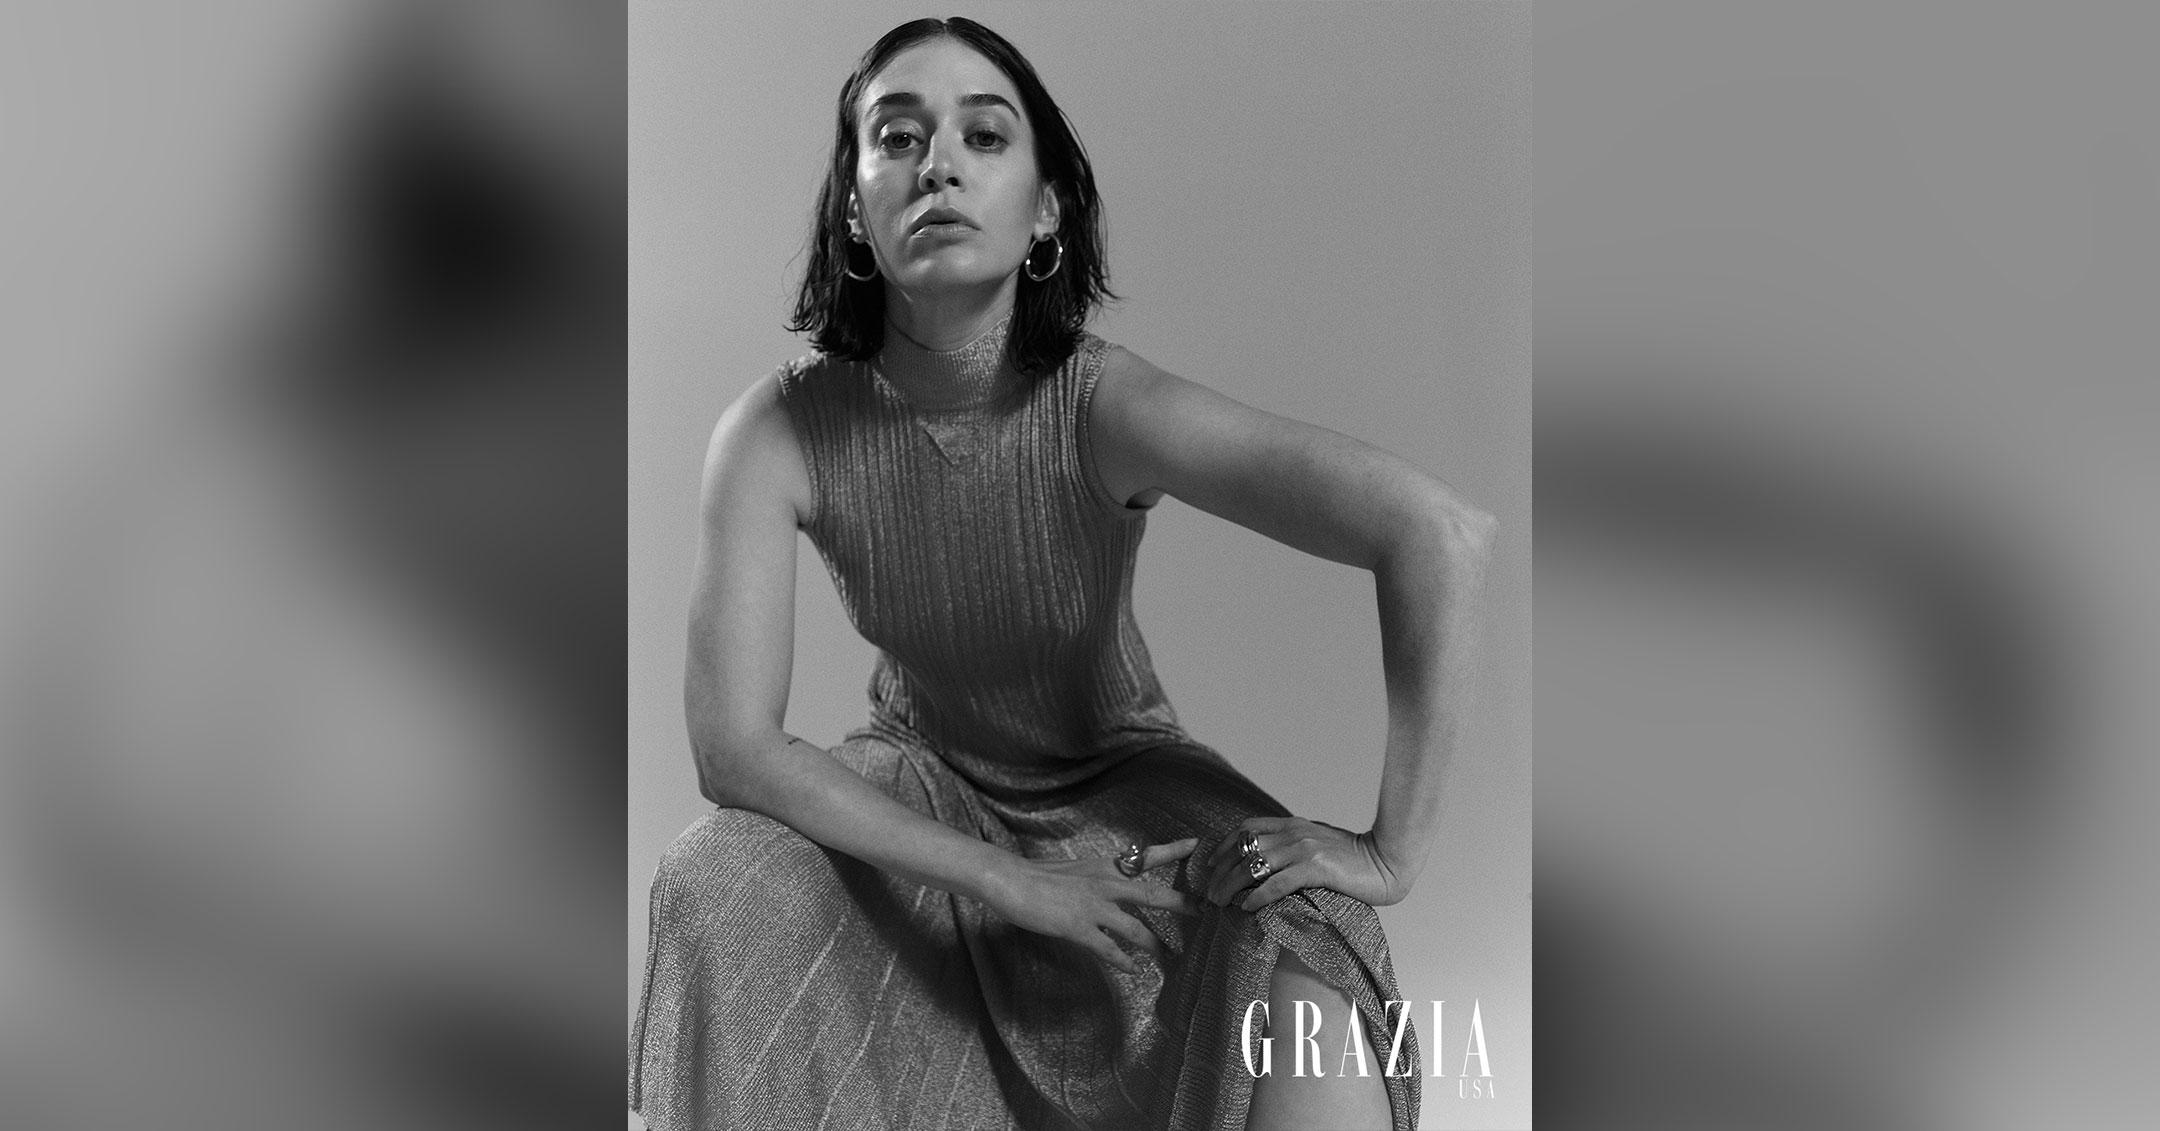 Lizzy Caplan Says Being A Mom Brings Unrivaled Pure Joy